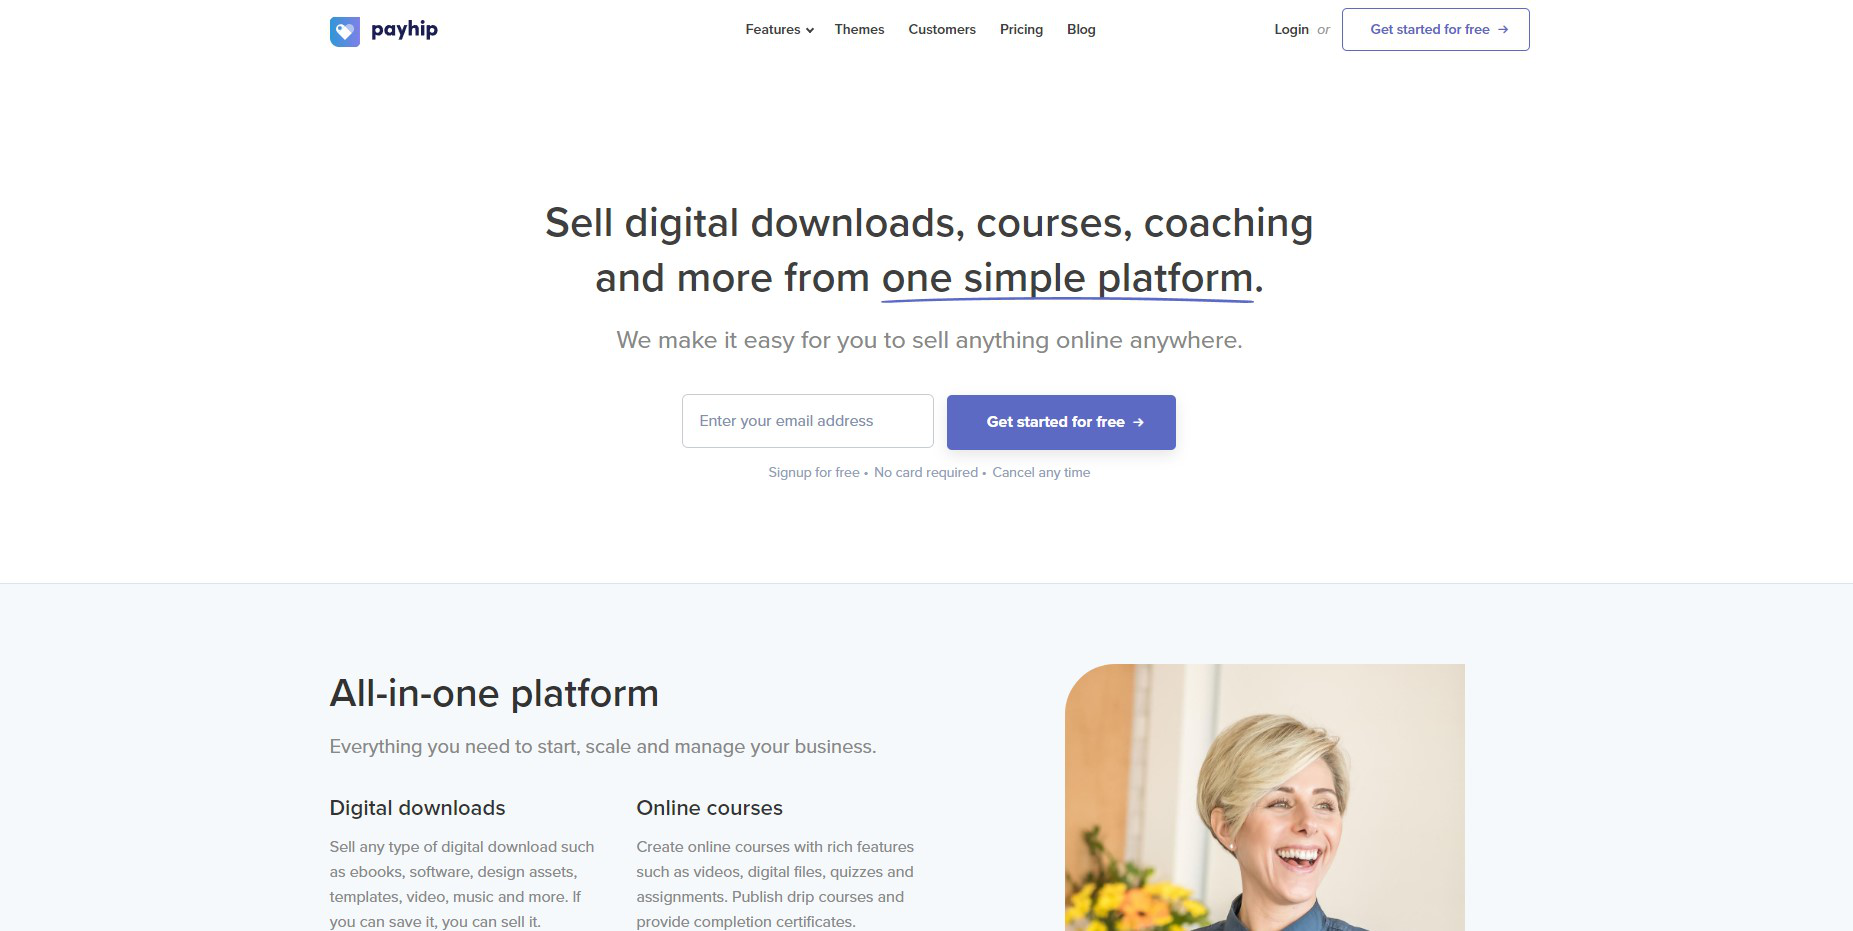 Payhip is an excellent solution for people who want to sell coaching, digital downloads, or online courses from a single platform. 